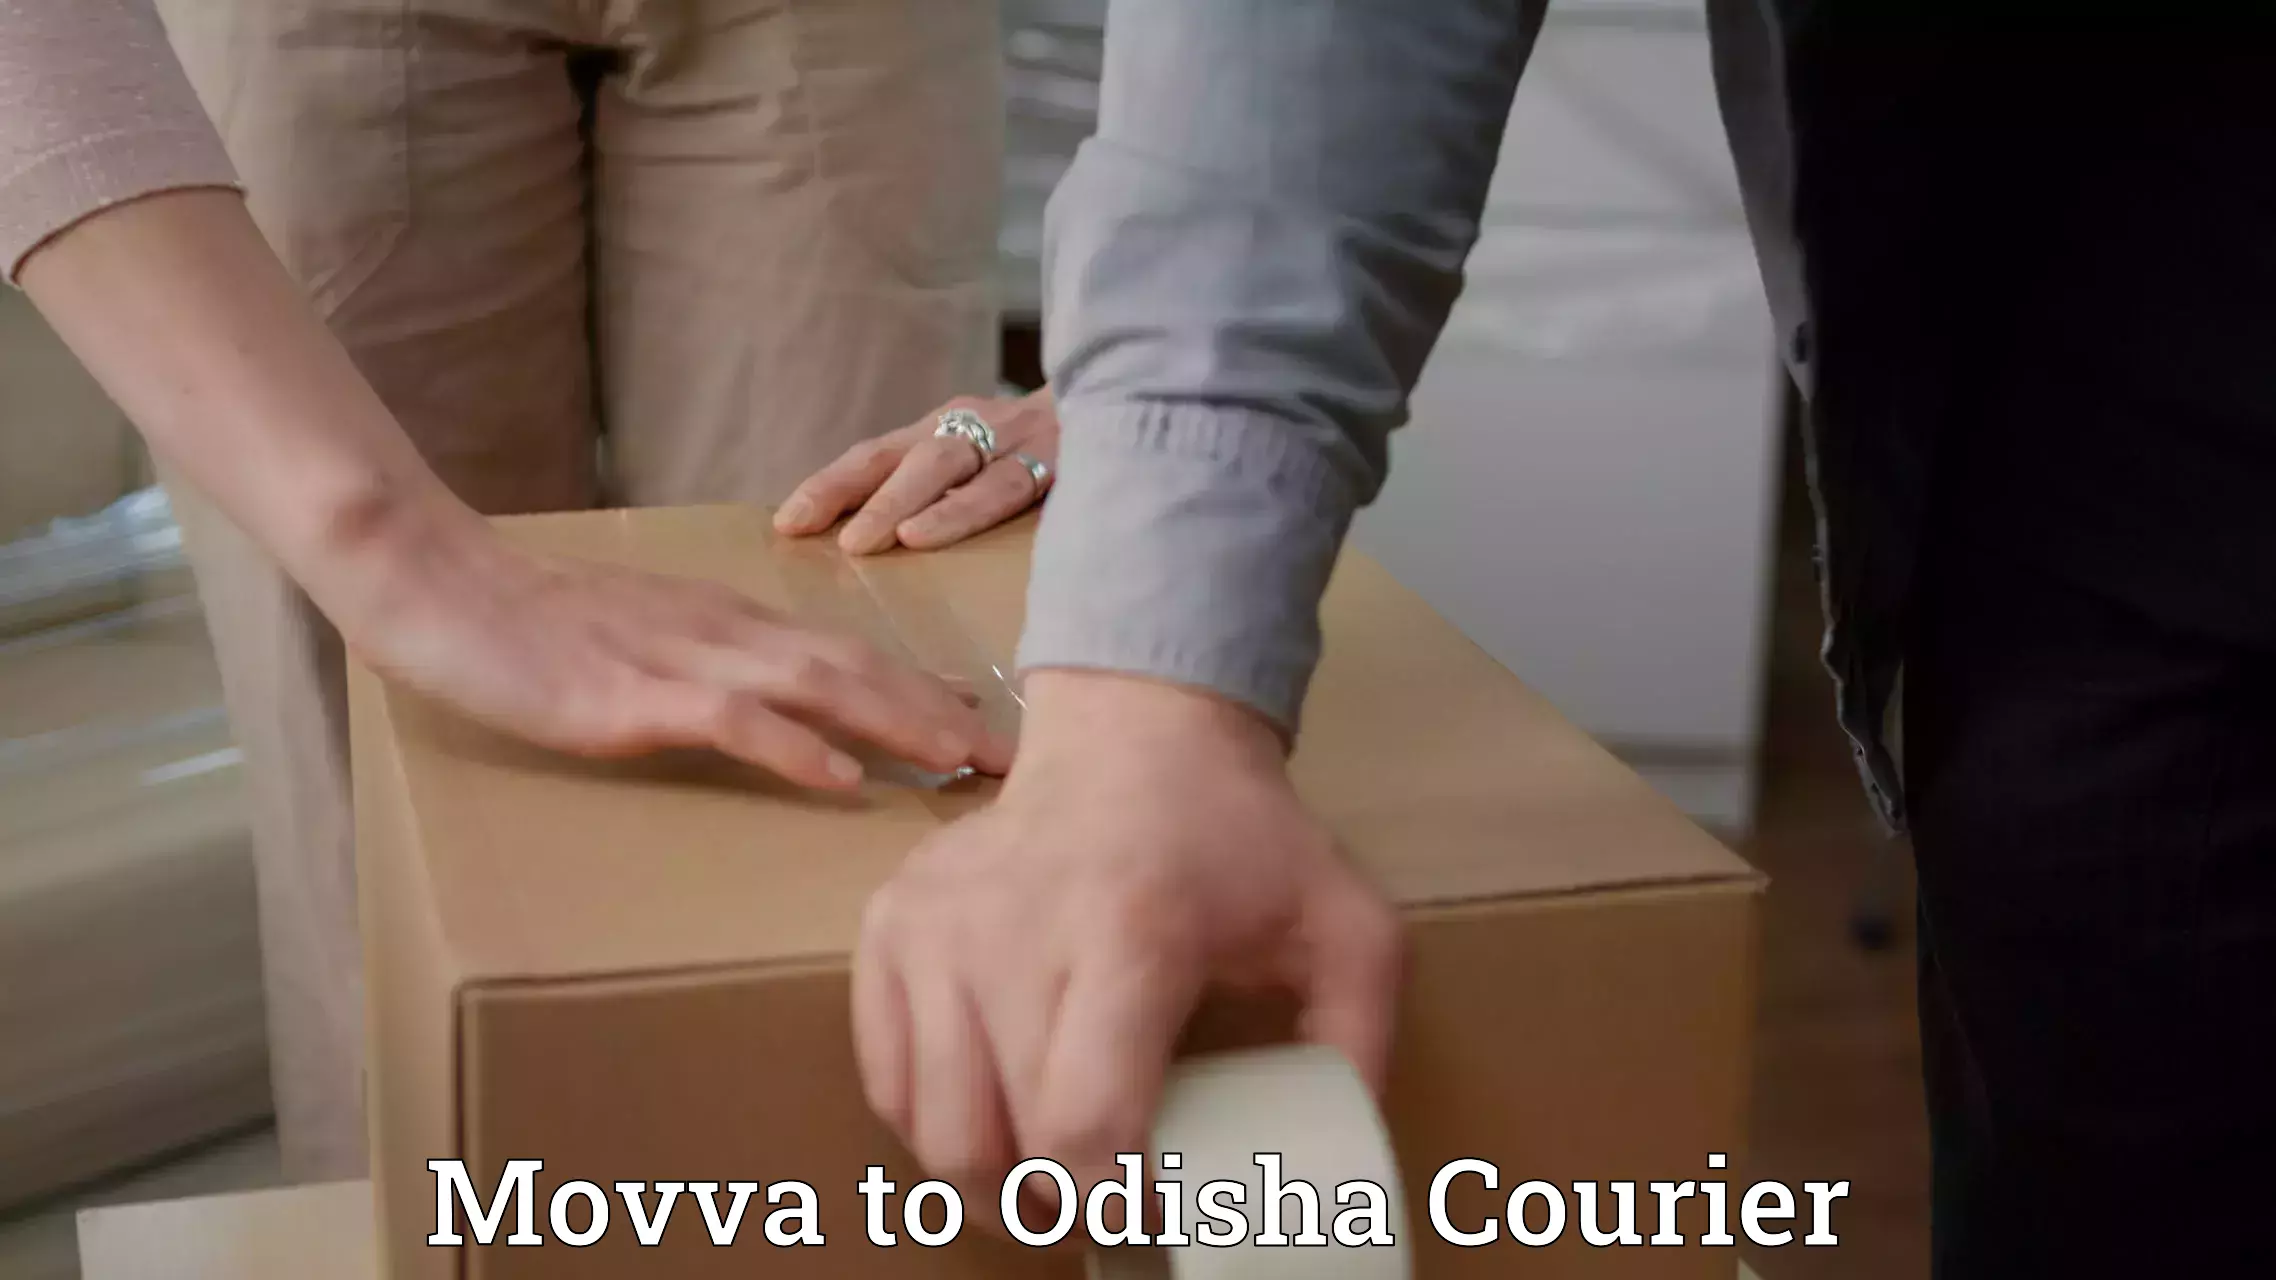 Courier rate comparison Movva to Bhuban